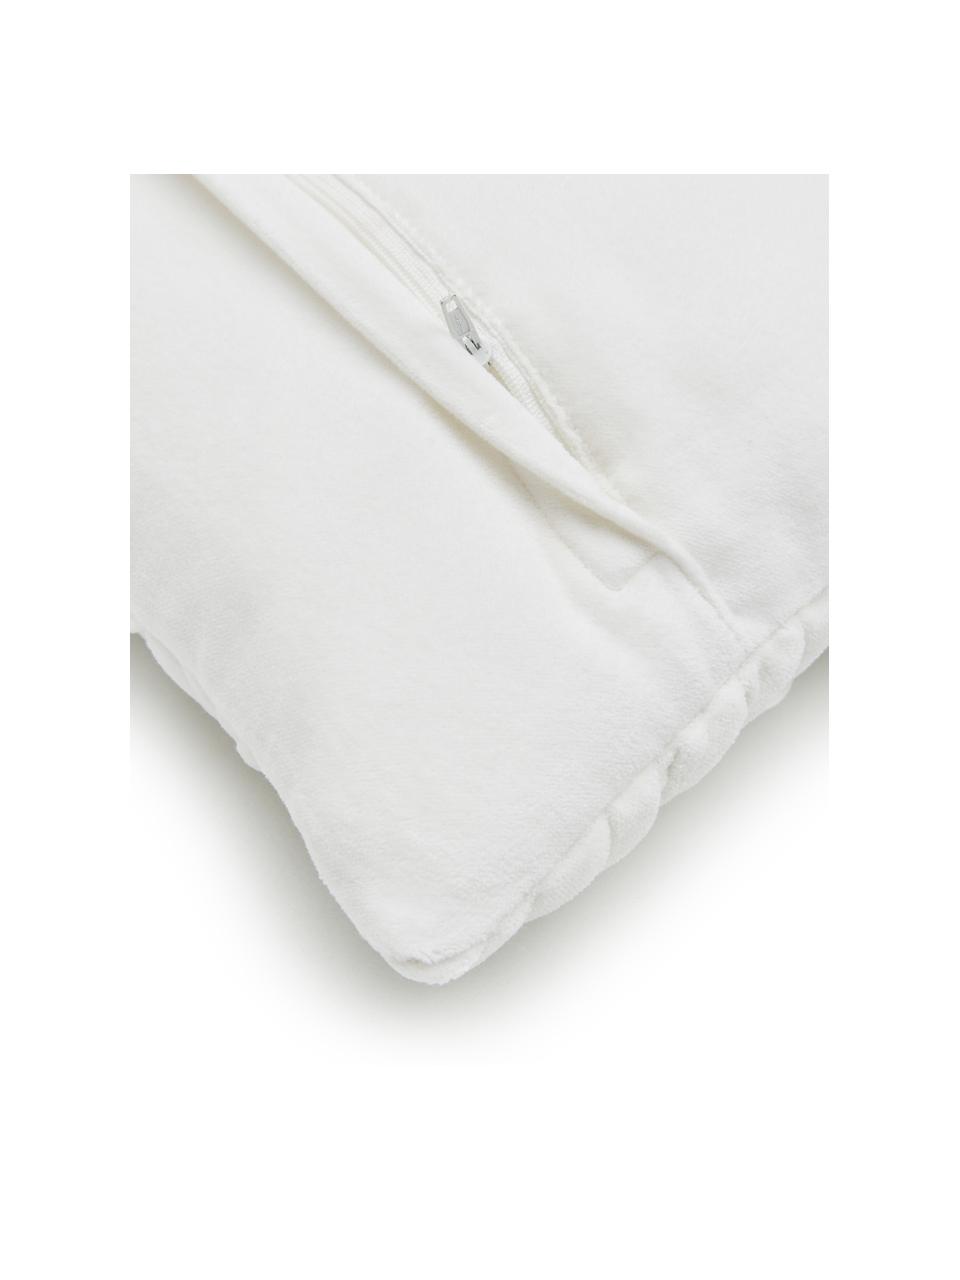 Coussin rectangulaire velours Smock, Blanc